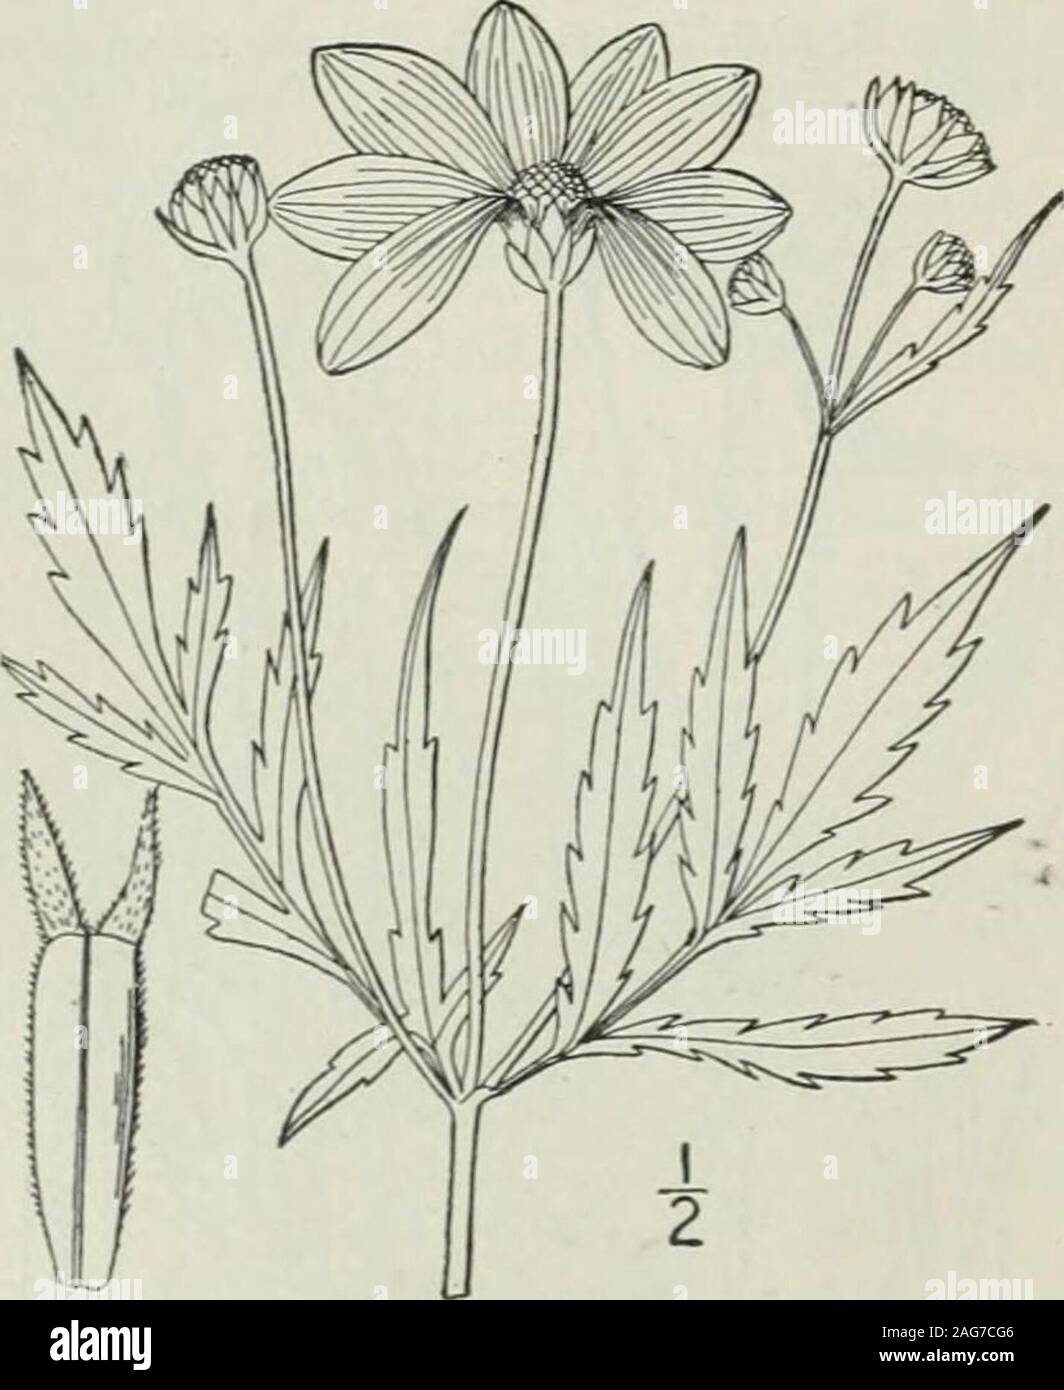 . An illustrated flora of the northern United States, Canada and the British possessions : from Newfoundland to the parallel of the southern boundary of Virginia and from the Atlantic Ocean westward to the 102nd meridian. perma var. tenuiloba A. Gray, Syn. FI. I : Part 2, 295. 1884.Bidens trichosperma tenuiloba Britton, Bull. Torr. Club 20 : 281. 1893. Annual or biennial, glabrous; stem tall, obscurelyquadrangular, much branched, 2°-5° high. Lowerleaves petioled, 4-8 long, pinnately divided into 5-7lanceolate or linear, acuminate, sharply serrate, in-cised or nearly entire, sessile or short-st Stock Photo